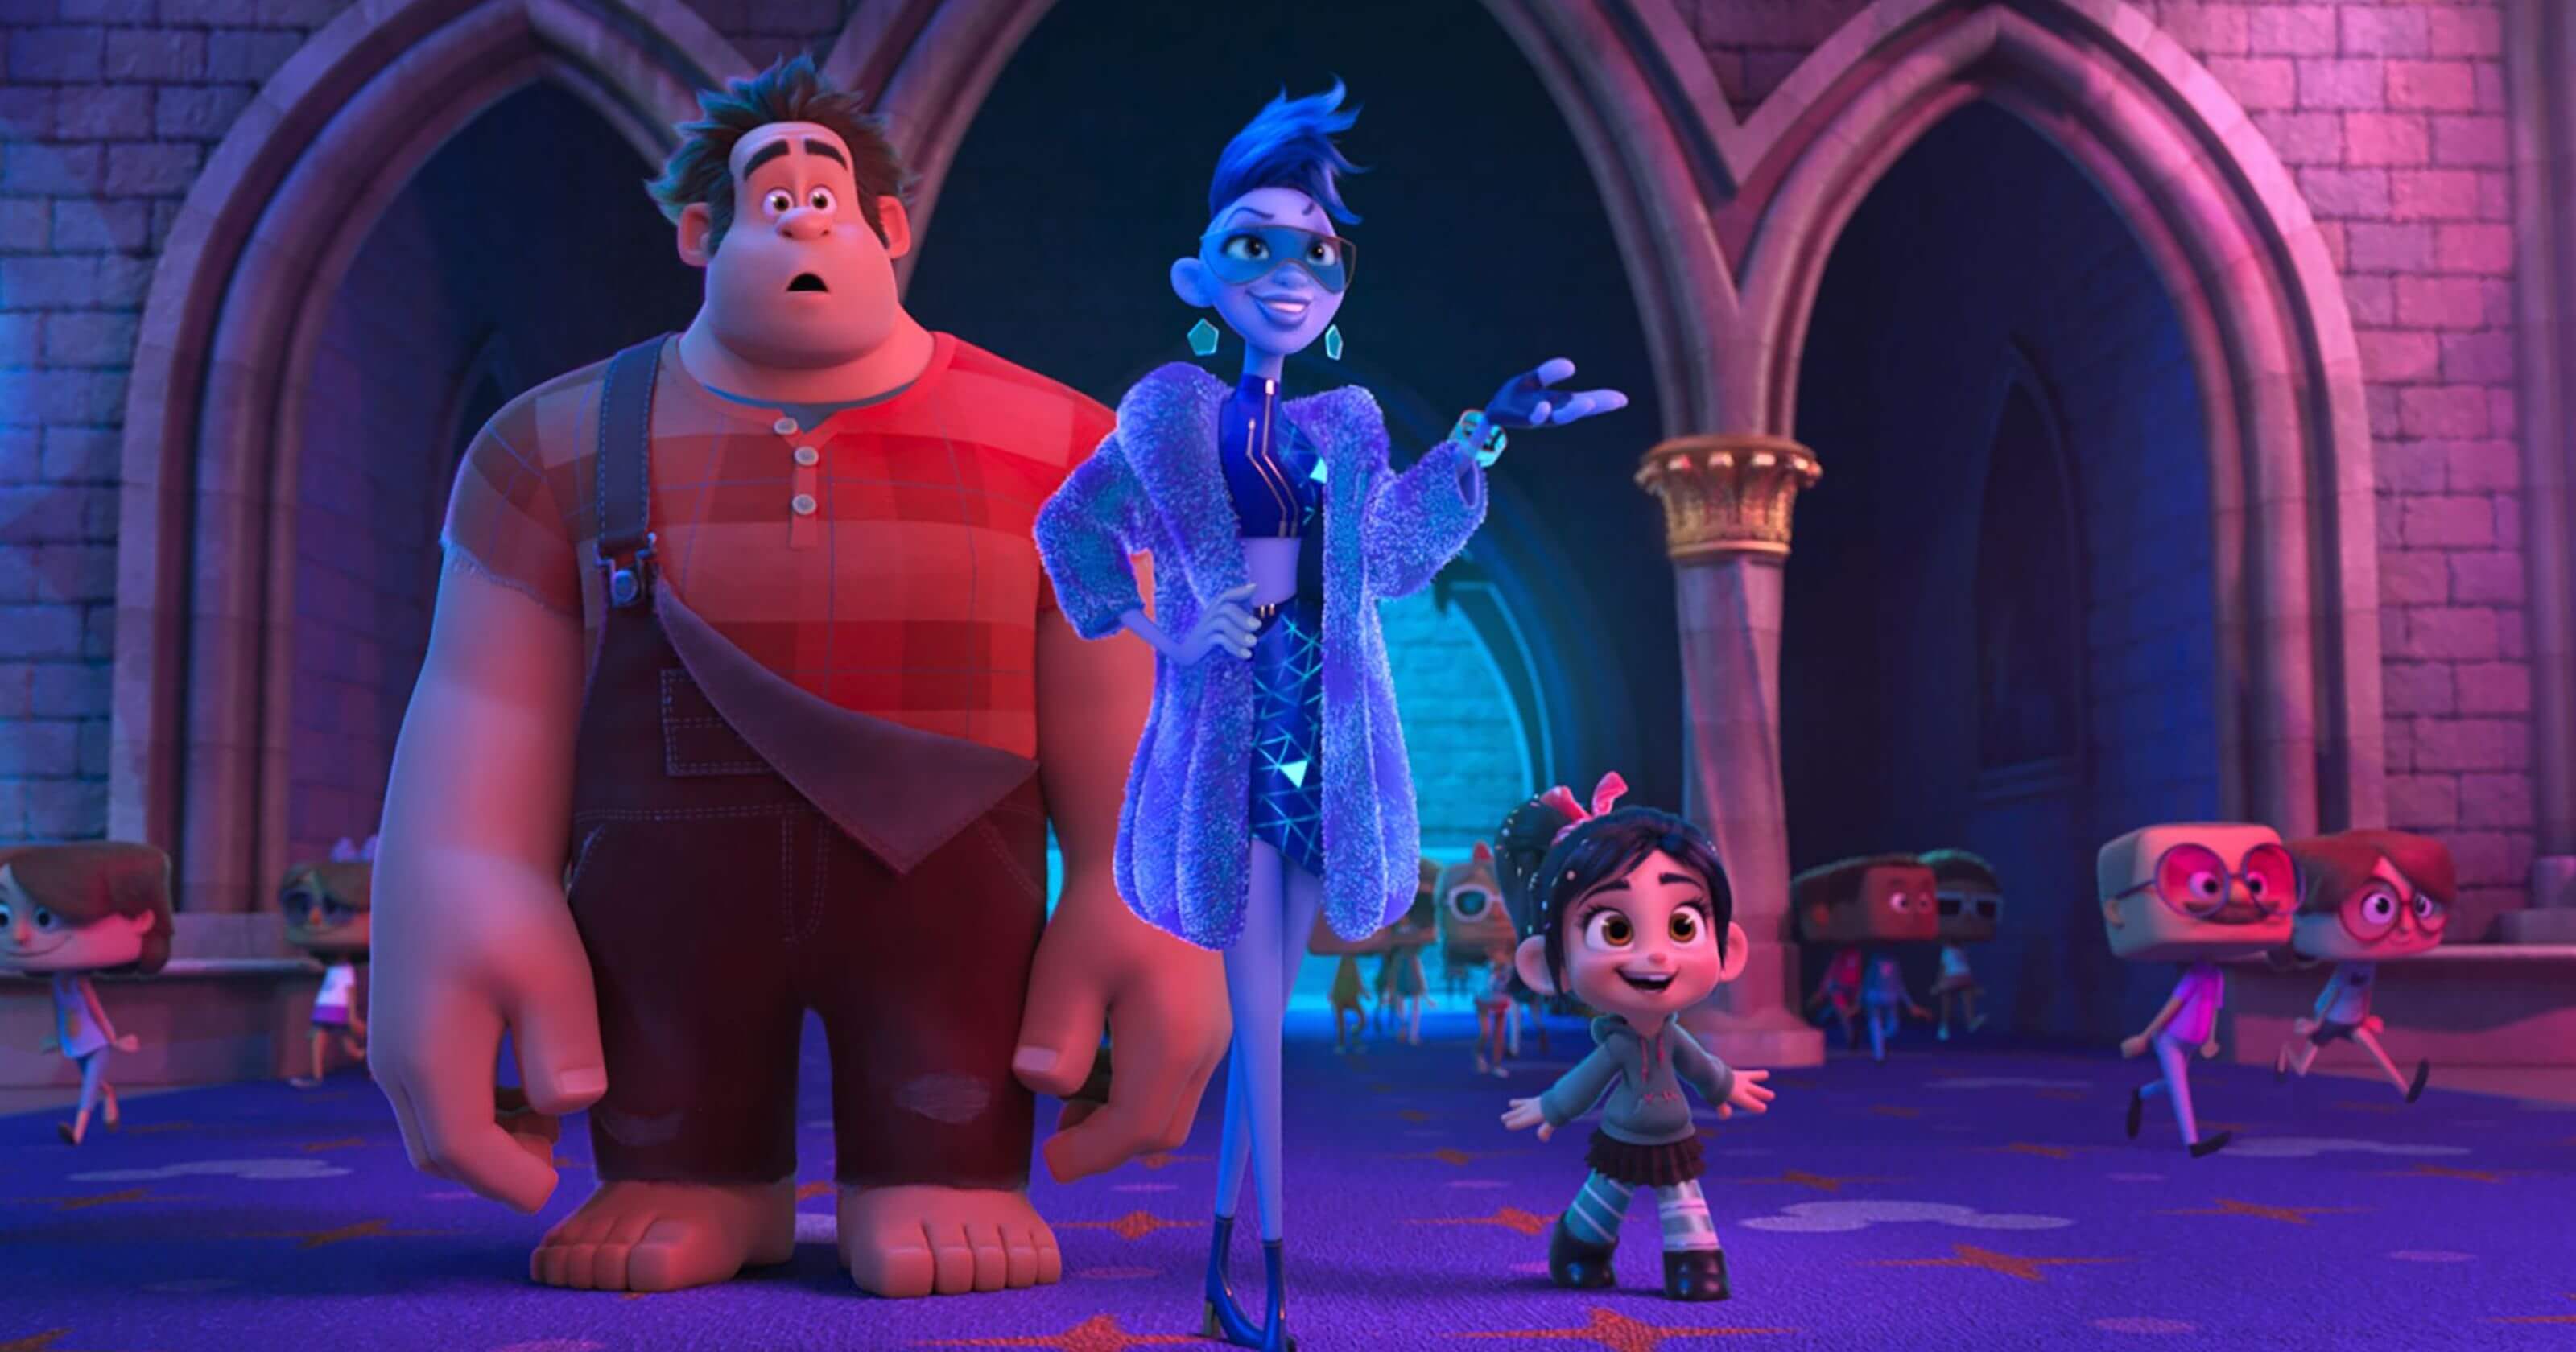 Ticket On Sale For ‘Ralph Breaks The Internet’; New Clip Debuts